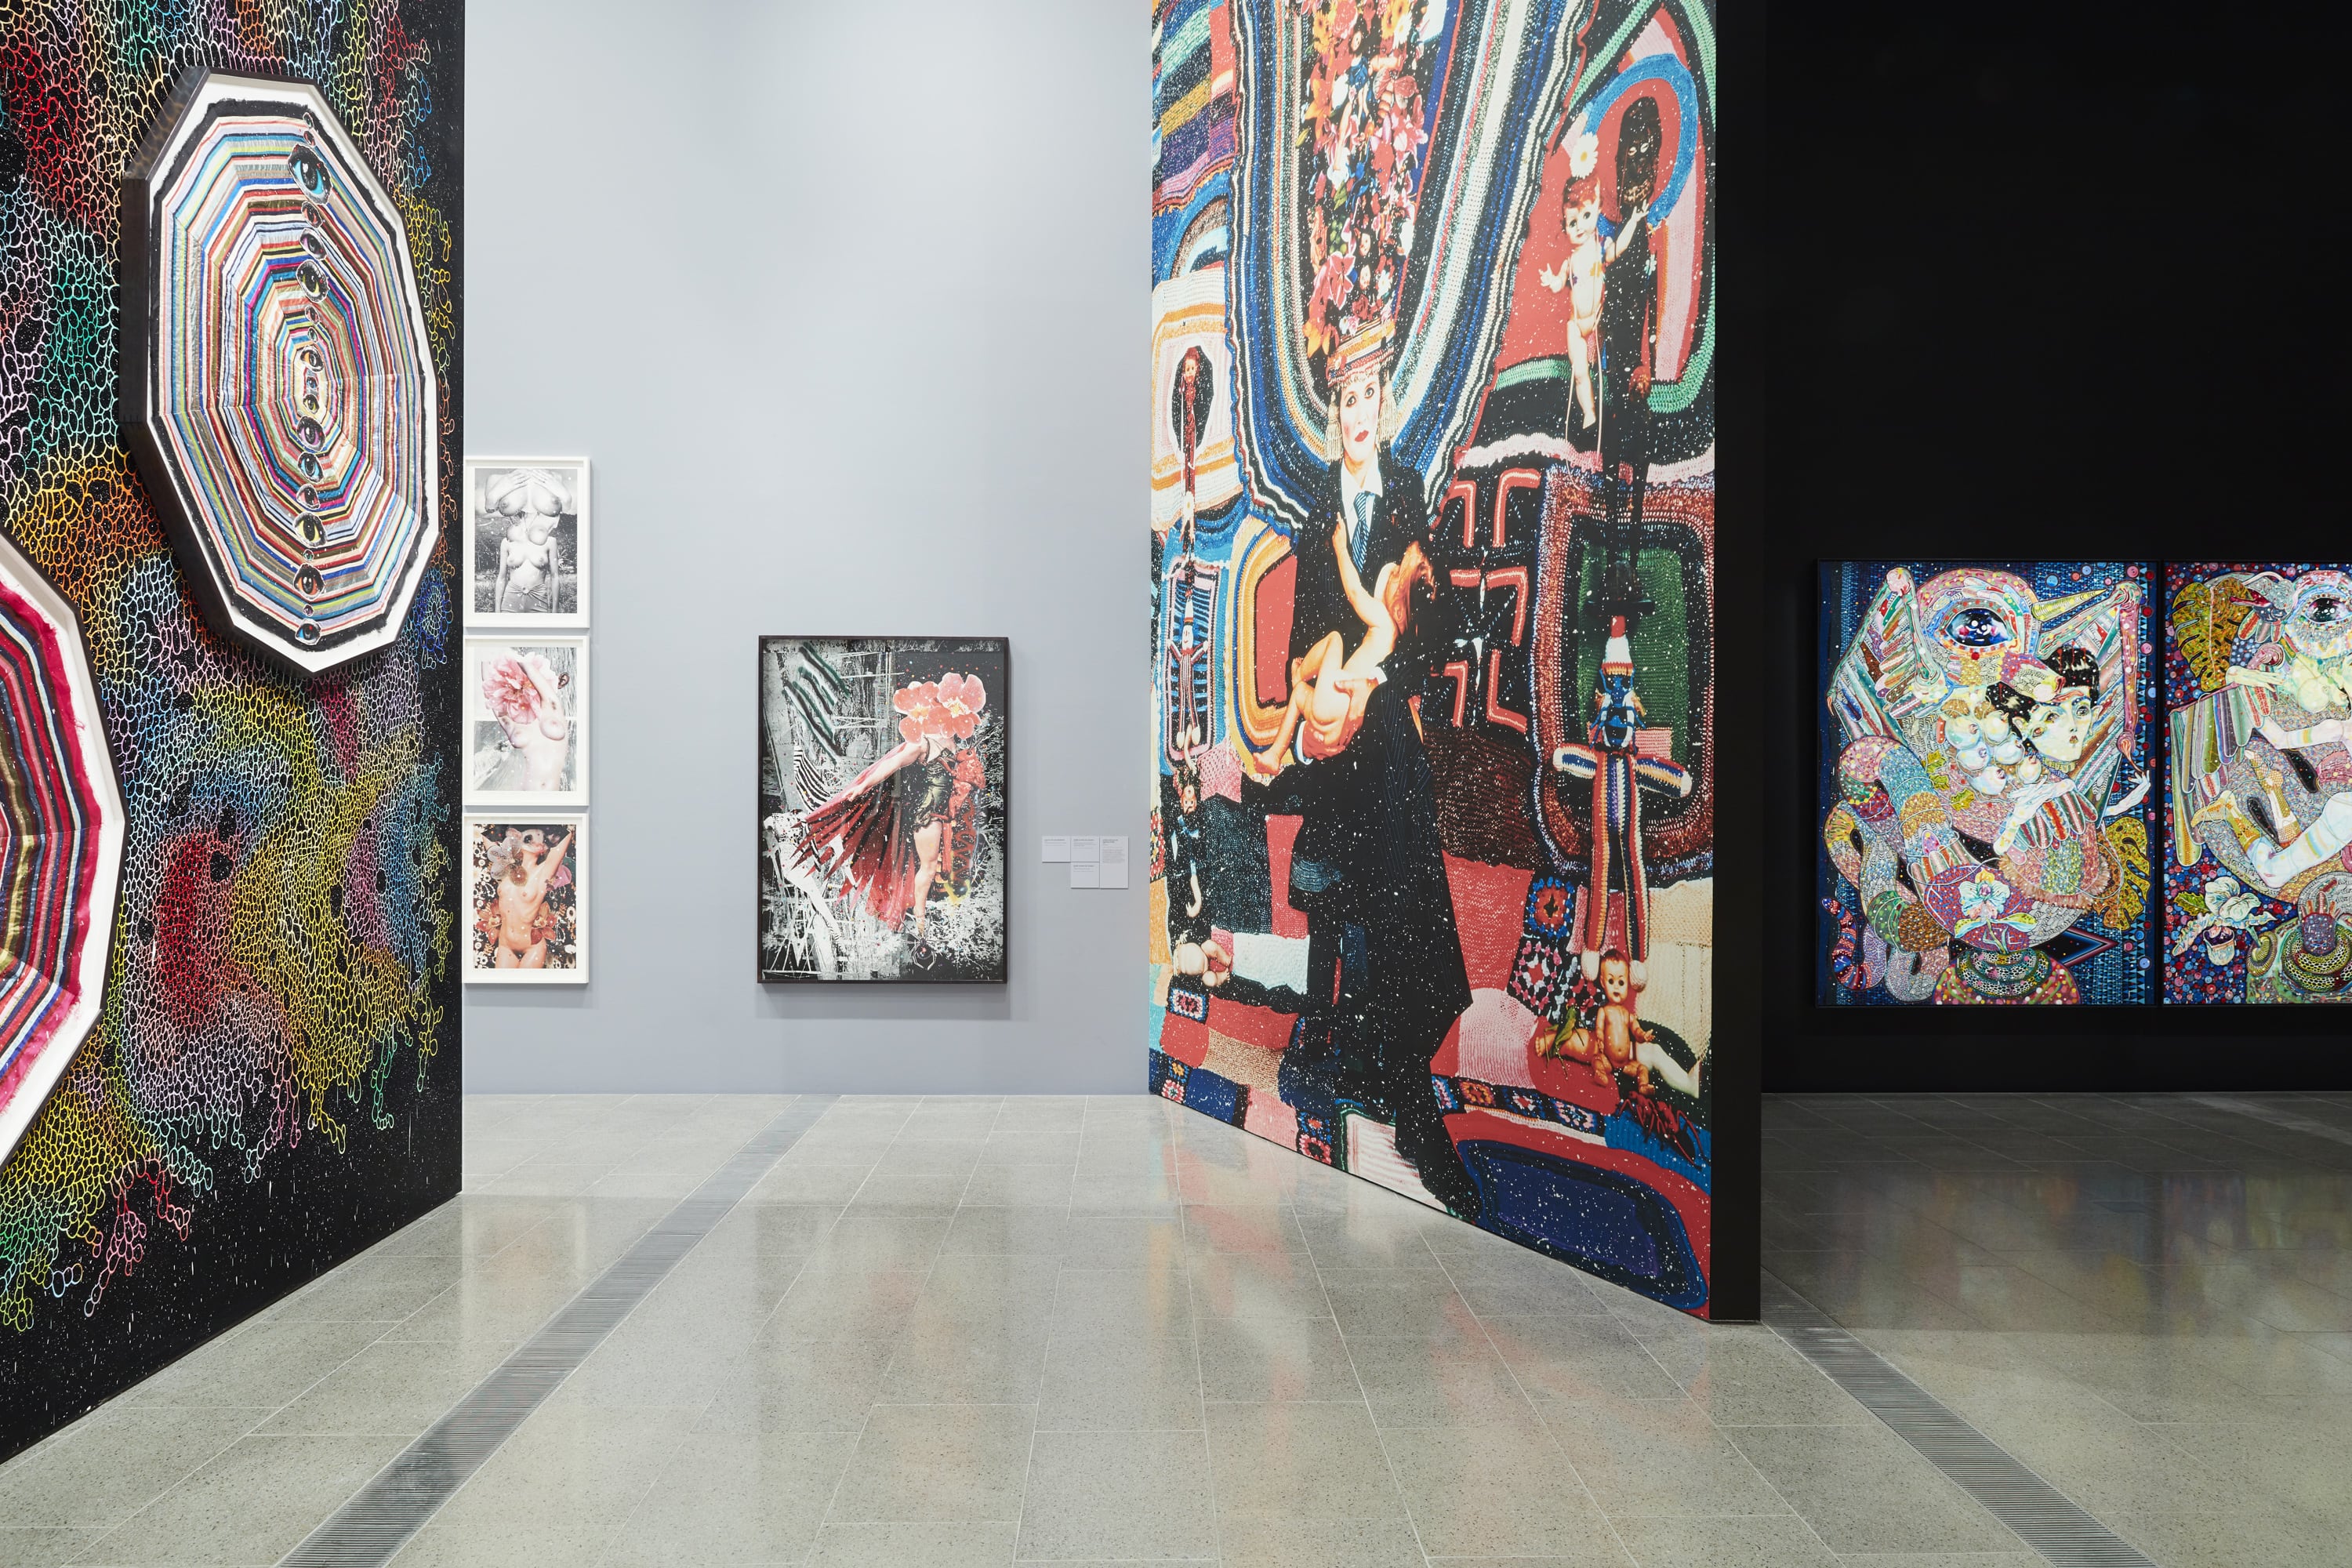 Image 04: Installation view of *Del Kathryn Barton: The Highway is a Disco* at the Ian Potter Centre: NGV Australia, 17 November 2017 - 12 March 2018. Photo Tom Ross.